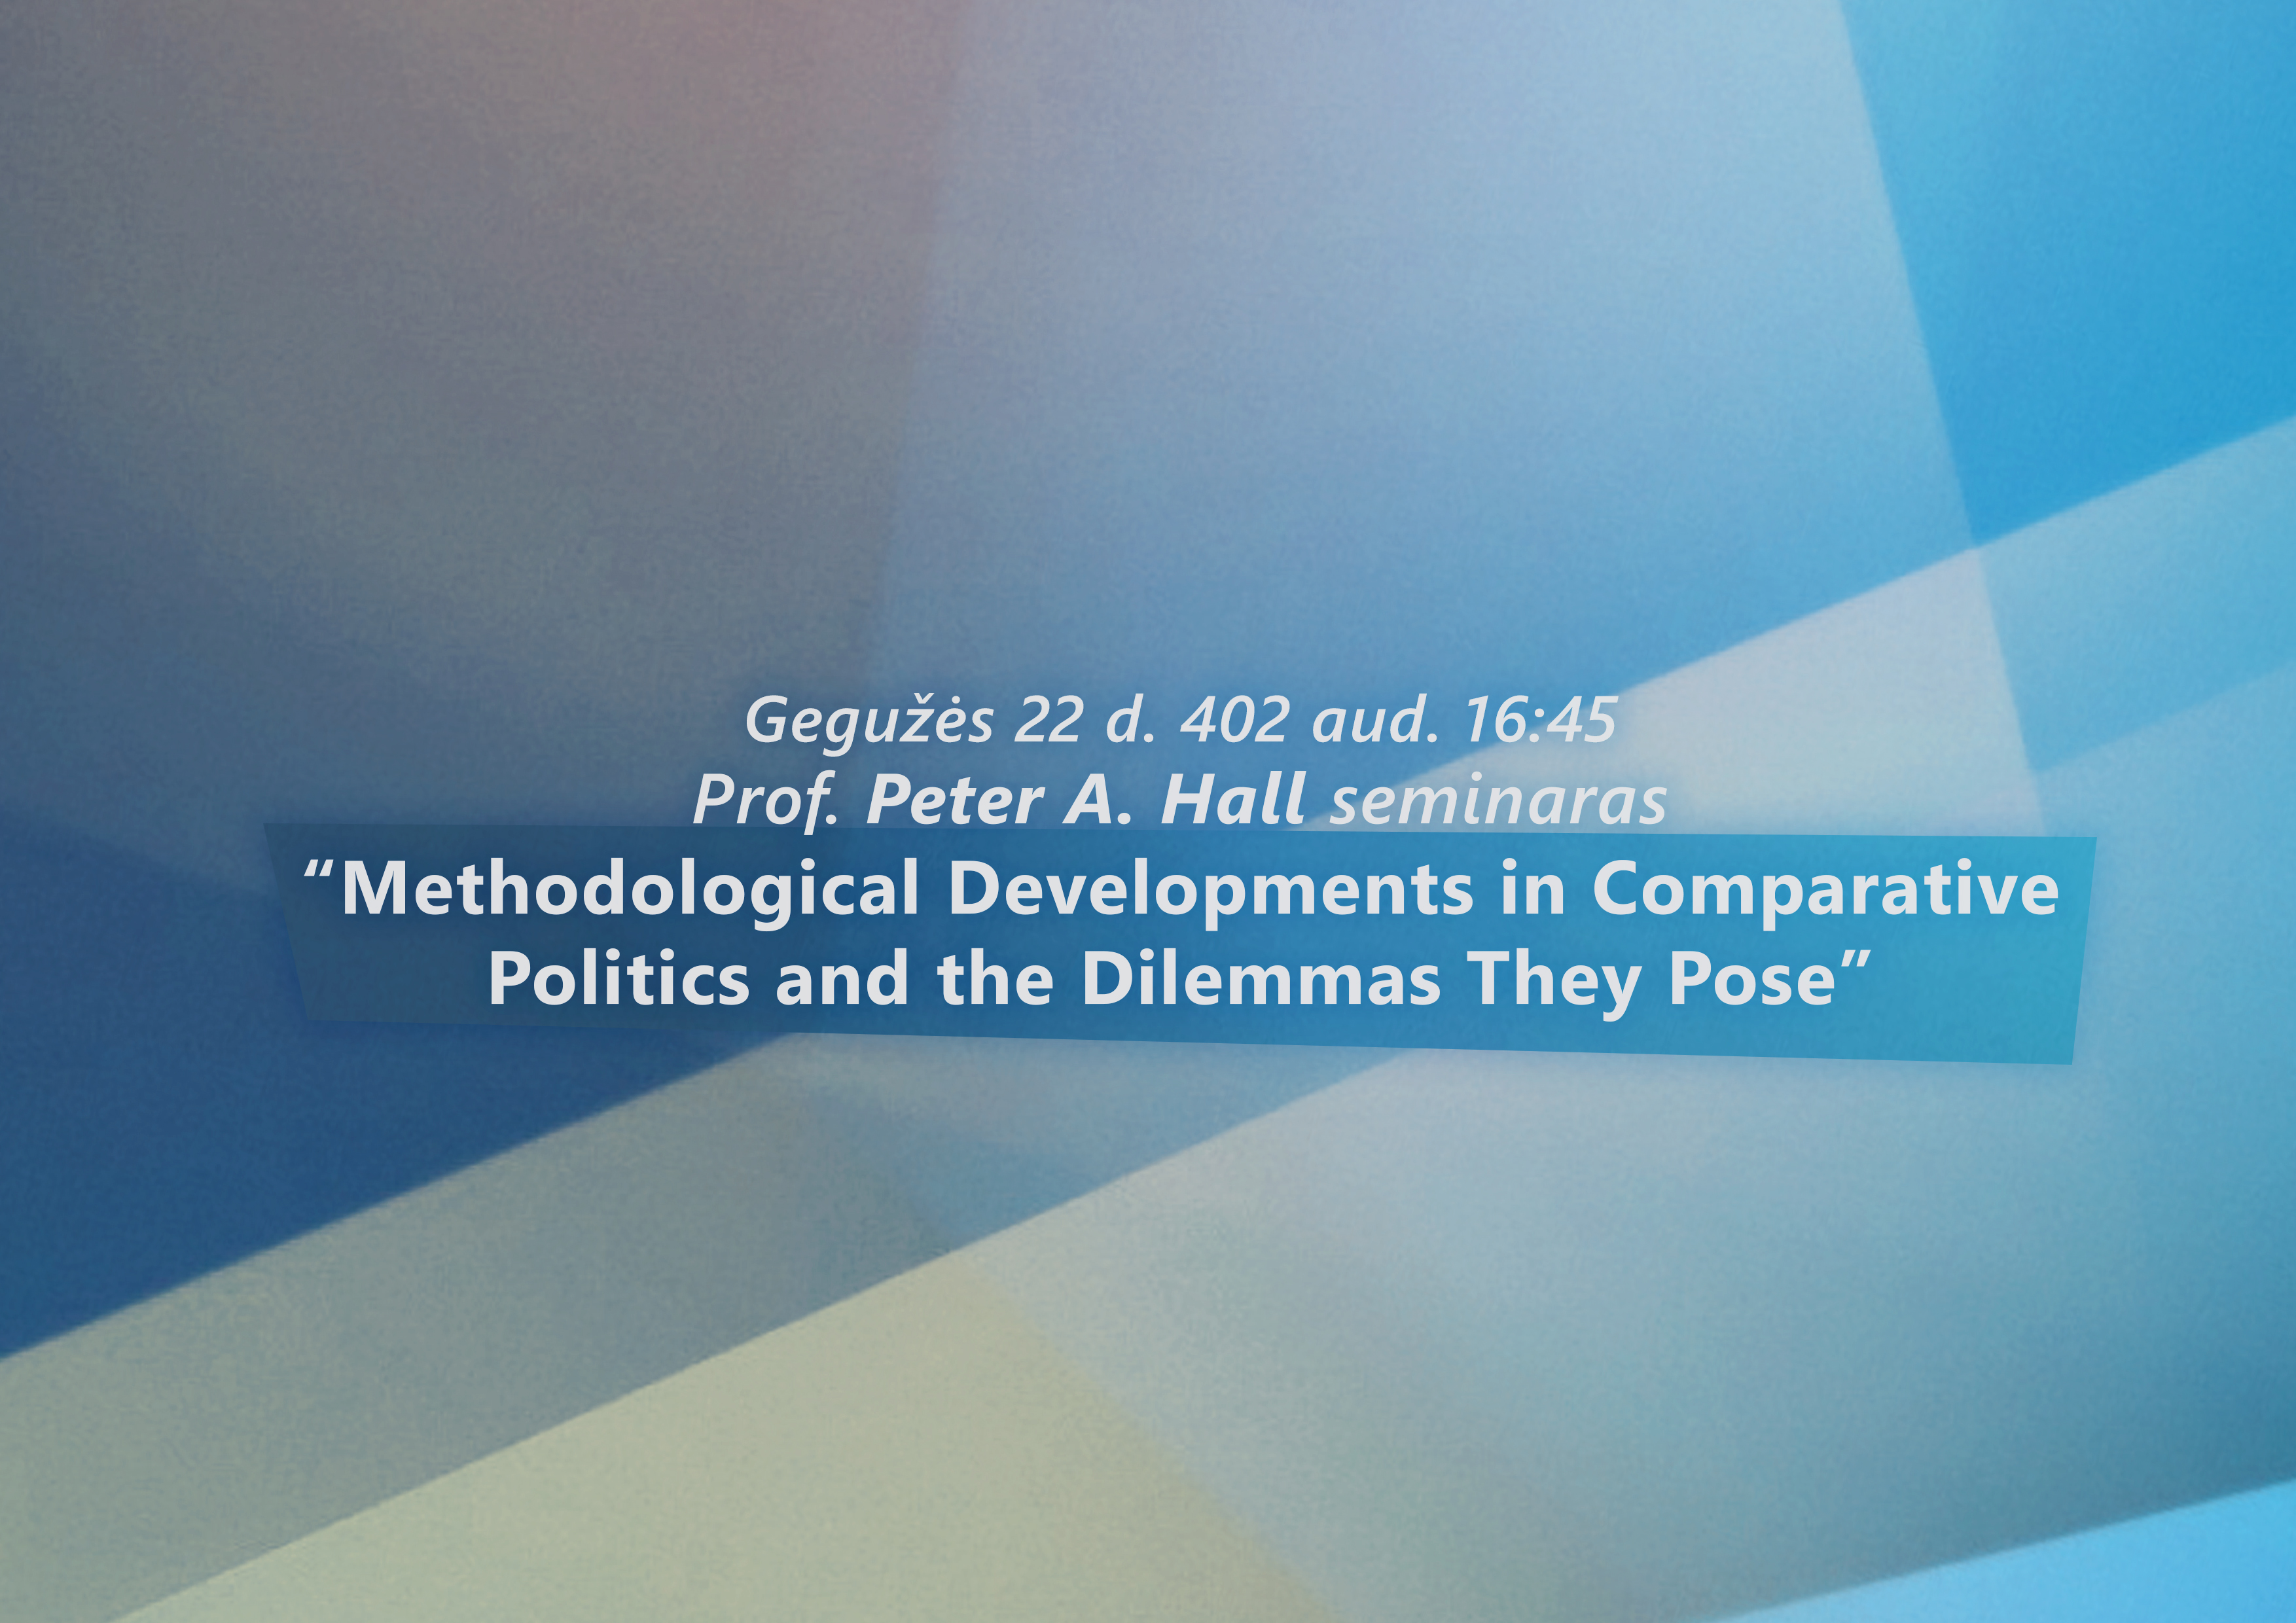 Atviras Peter A. Hall seminaras „Methodological Developments in Comparative Politics and the Dilemmas They Pose”